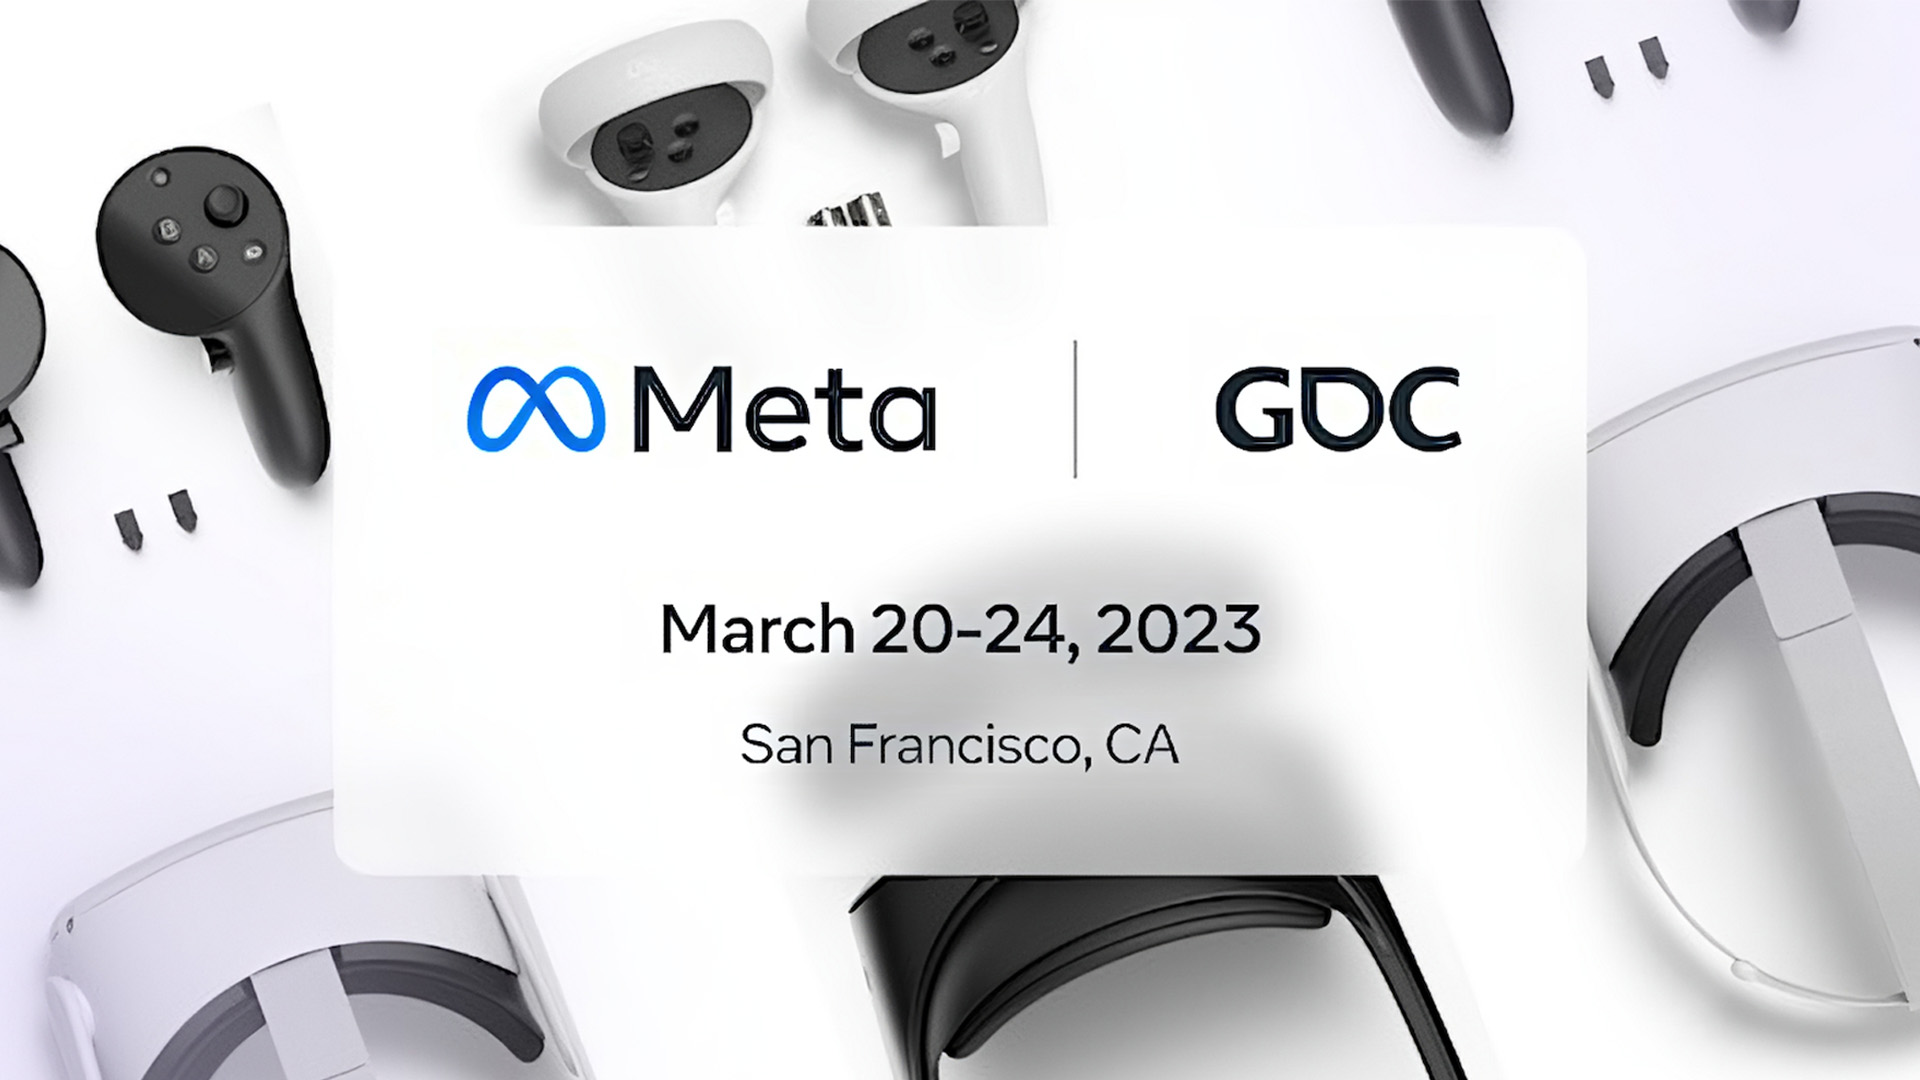 At GDC 2023, Meta promises a “peek into the future of VR technology”